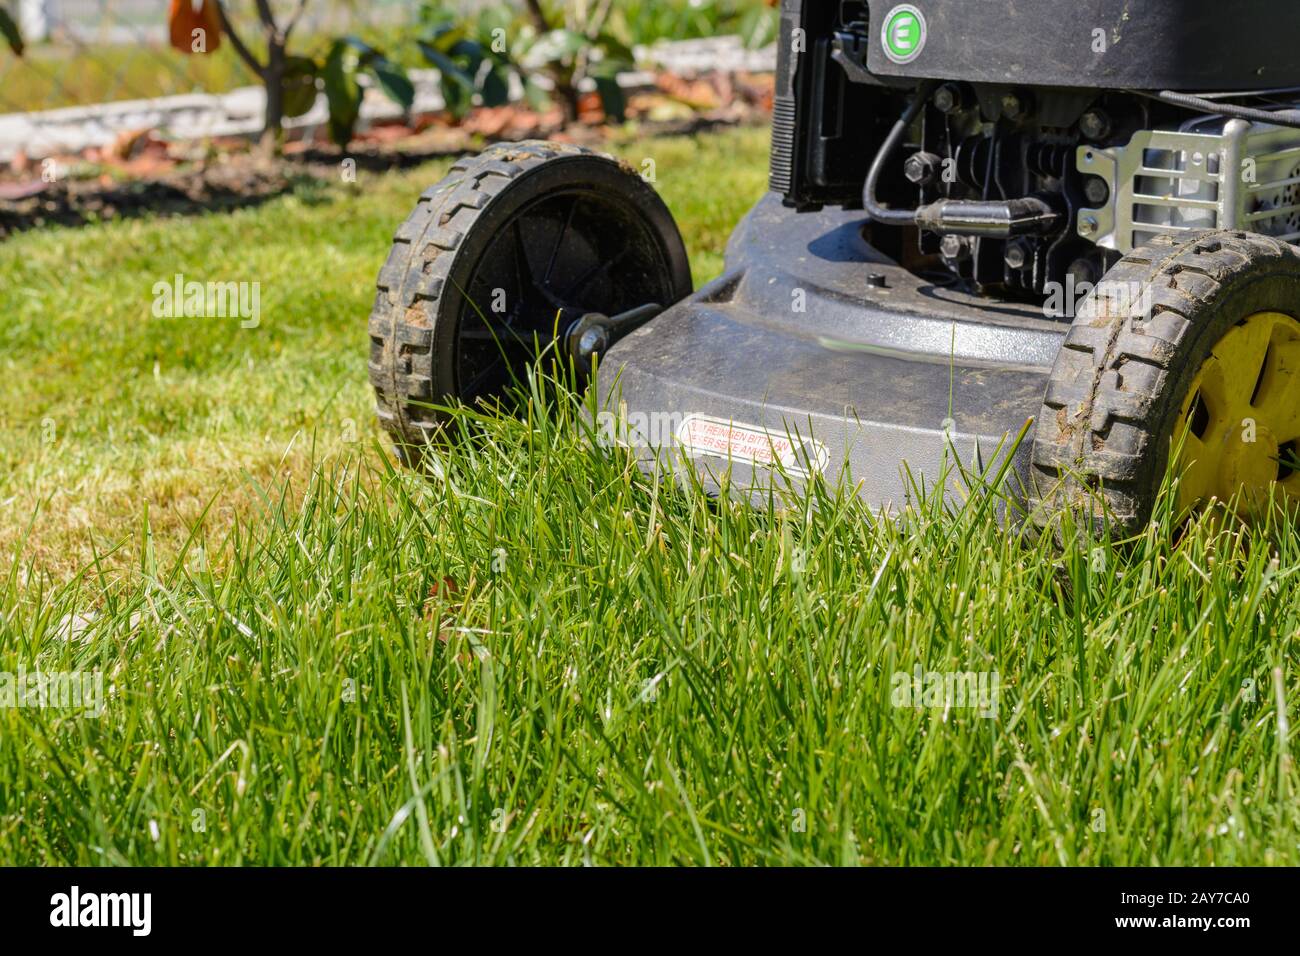 Cutting the lawn with a lawnmower - close-up Stock Photo